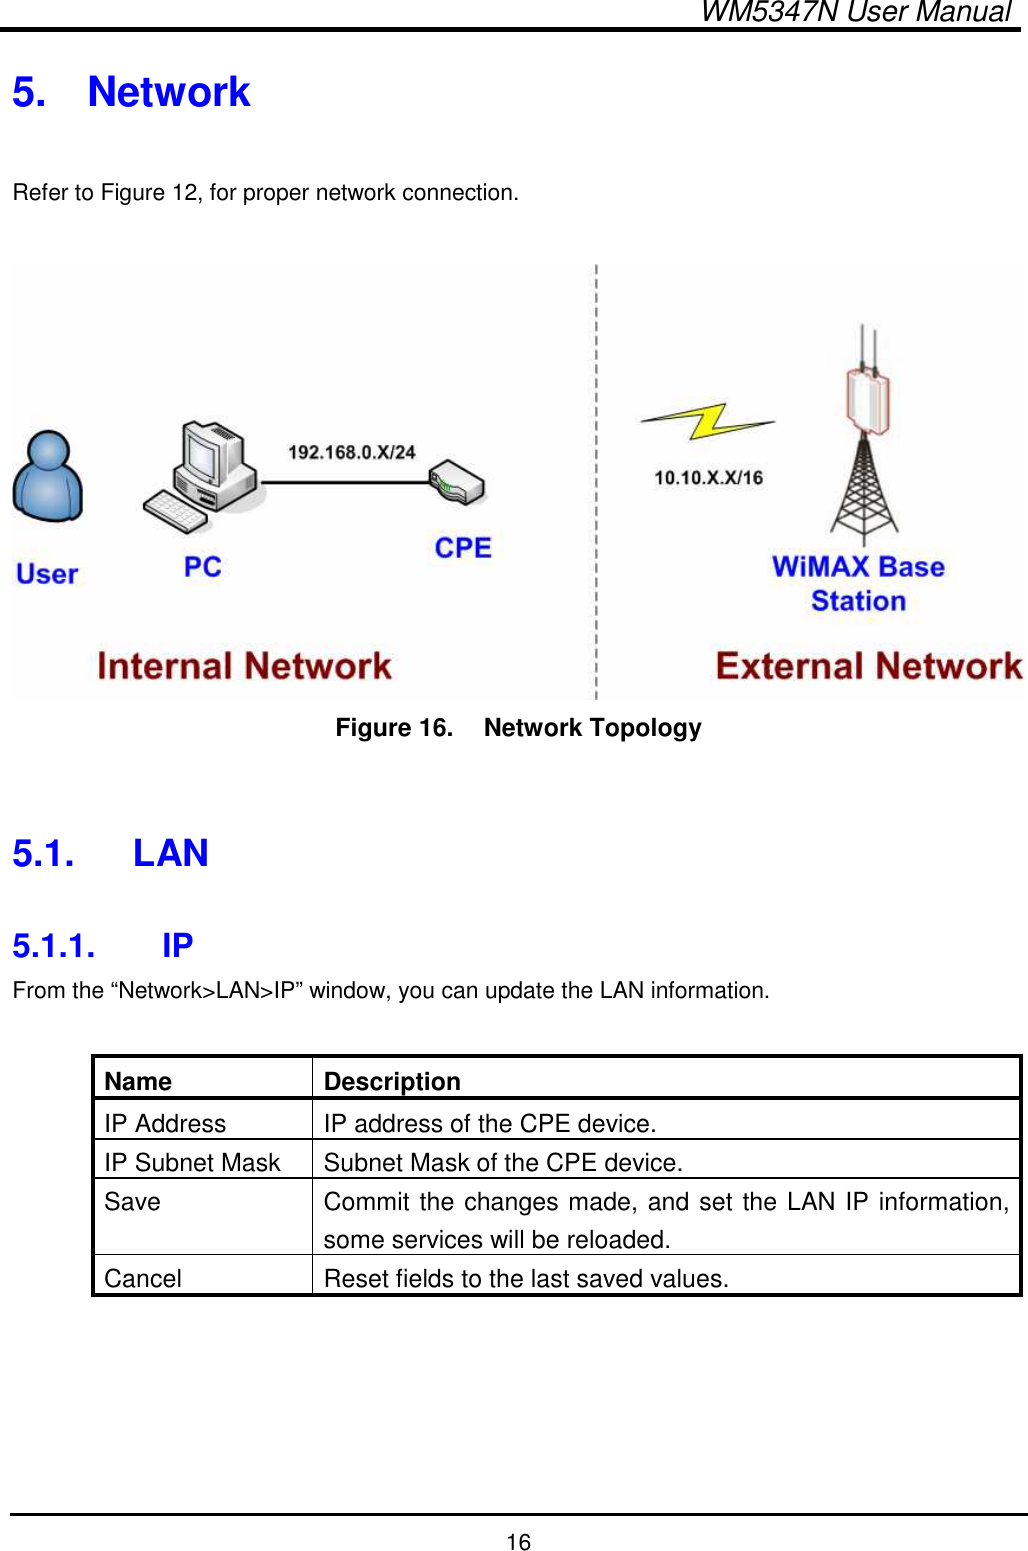  WM5347N User Manual  16 5.  Network  Refer to Figure 12, for proper network connection.   Figure 16.   Network Topology   5.1.  LAN  5.1.1.  IP From the “Network&gt;LAN&gt;IP” window, you can update the LAN information.  Name  Description IP Address  IP address of the CPE device. IP Subnet Mask  Subnet Mask of the CPE device. Save  Commit the changes made, and set the LAN IP information, some services will be reloaded. Cancel  Reset fields to the last saved values. 